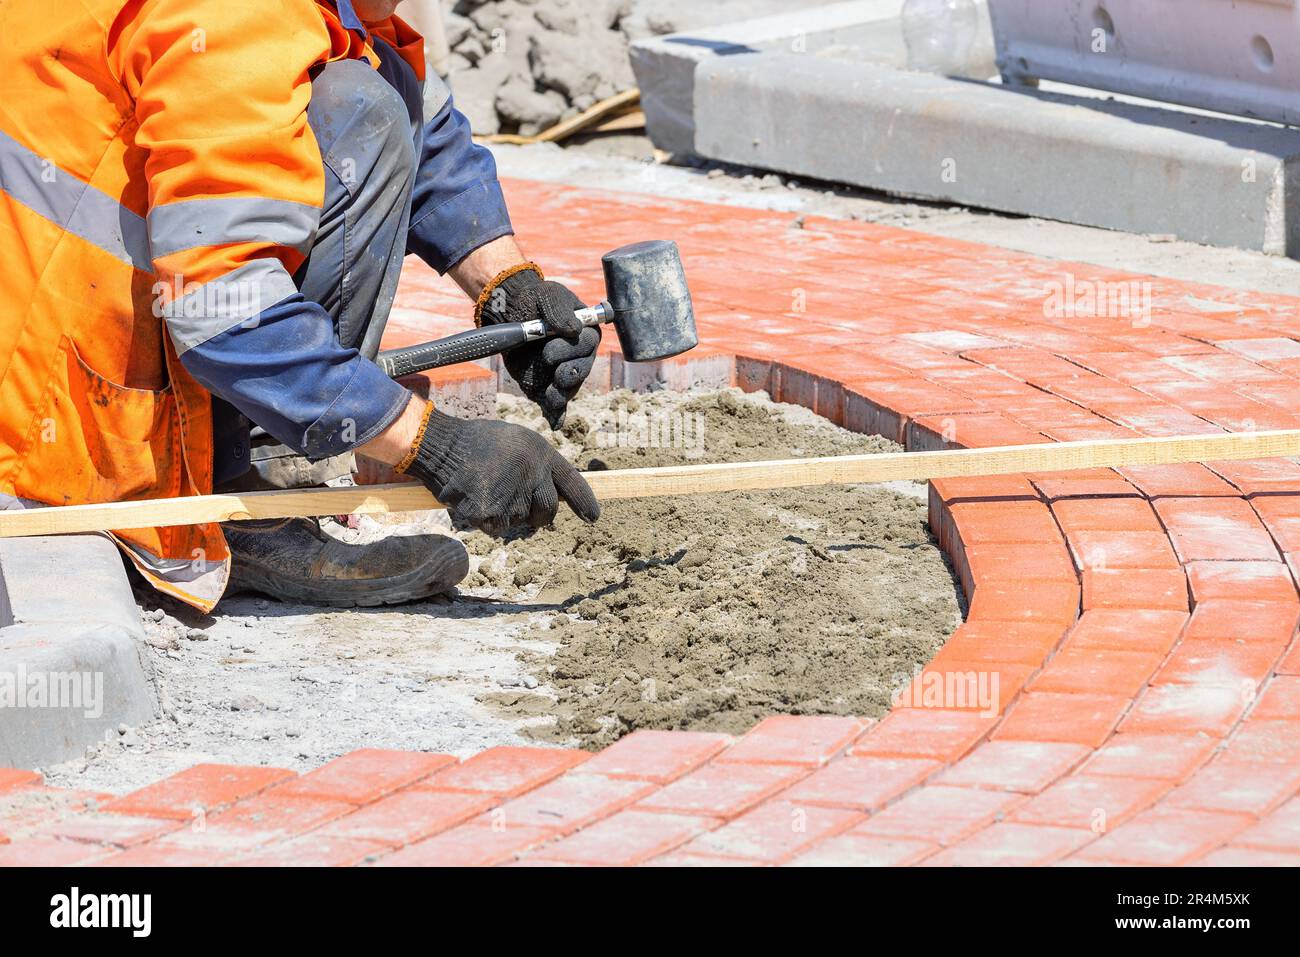 A bricklayer in work gloves and overalls carefully measures the size with a wooden plank and lays orange paving slabs on a footpath on a sunny day. Stock Photo